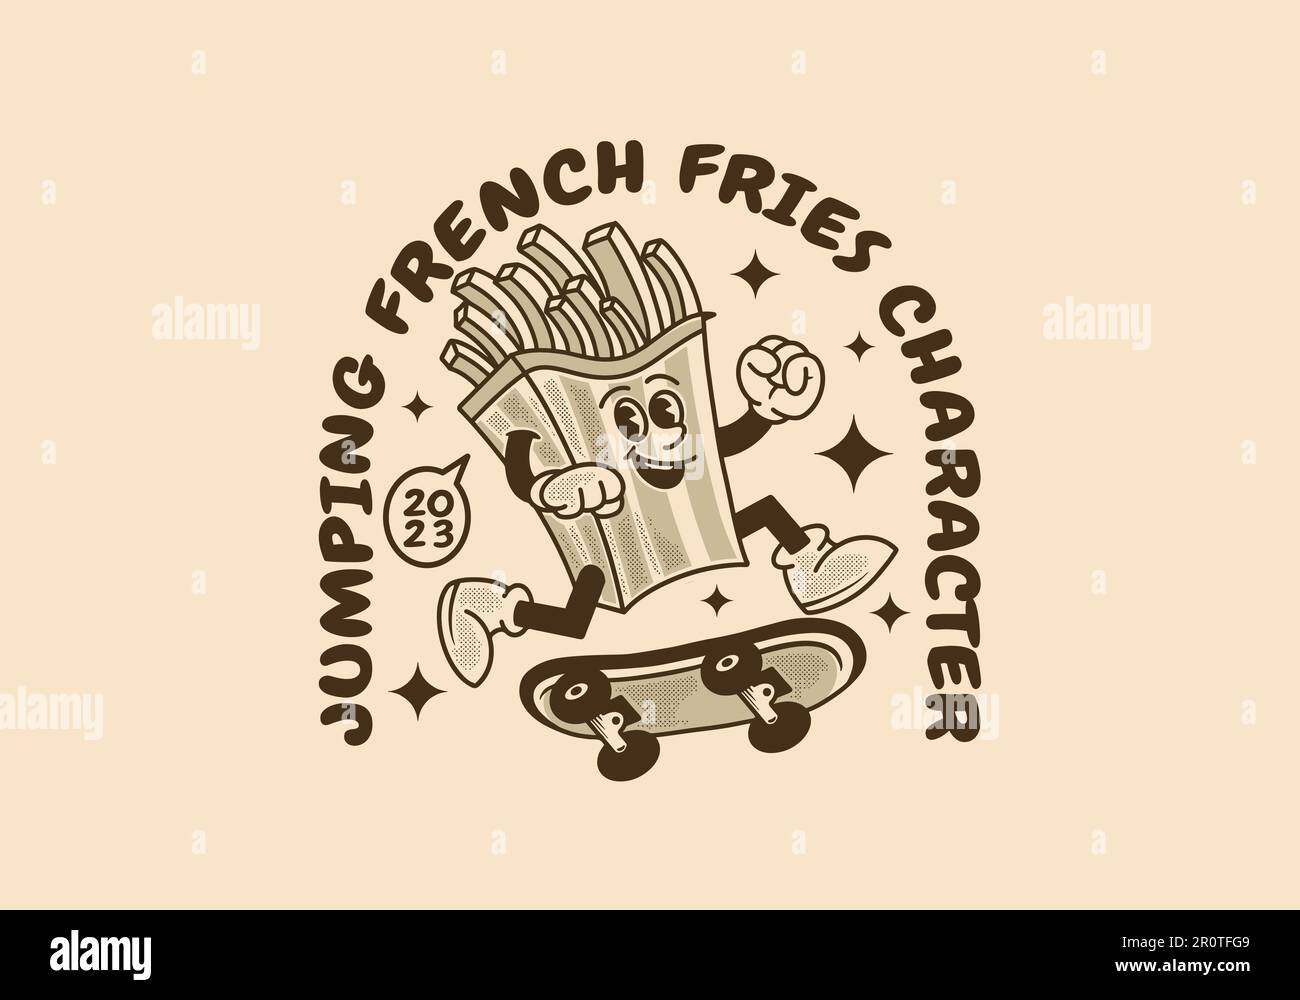 Vintage mascot character design of French fries jumping on skate board Stock Vector